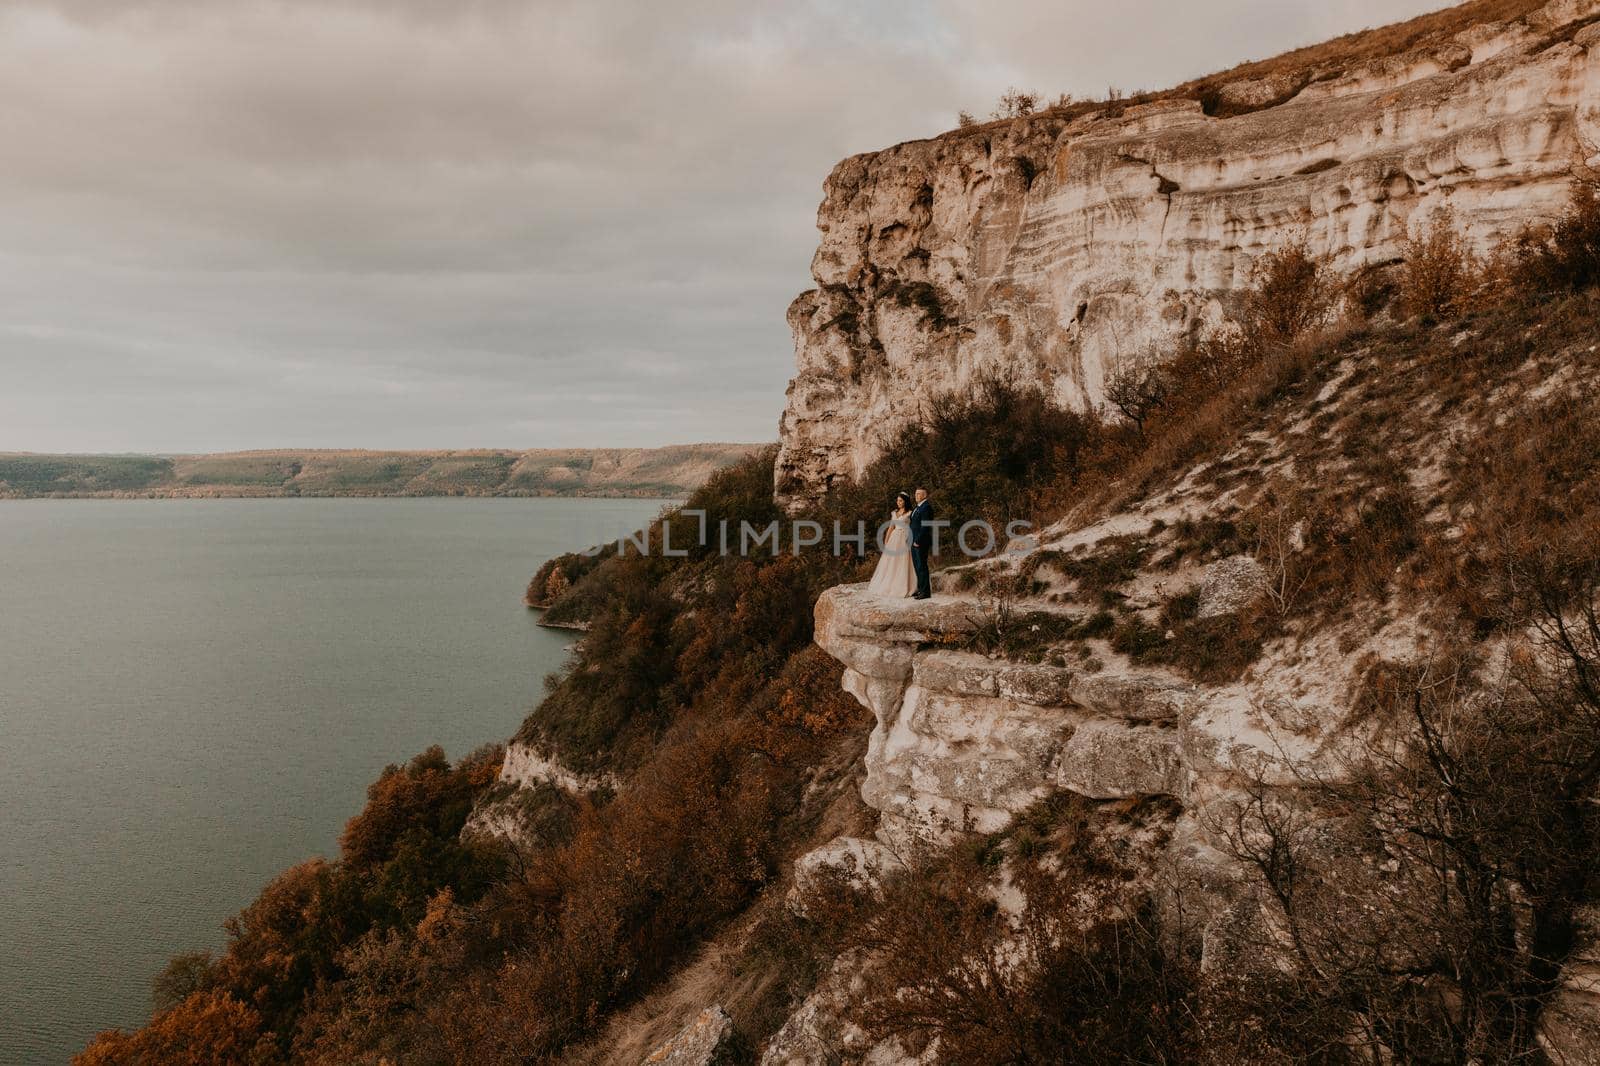 groom in suit and the bride in a dress stand on a stone cliff above the river. Mountain near lake. Aerial view from drone. rock monastery in bakota